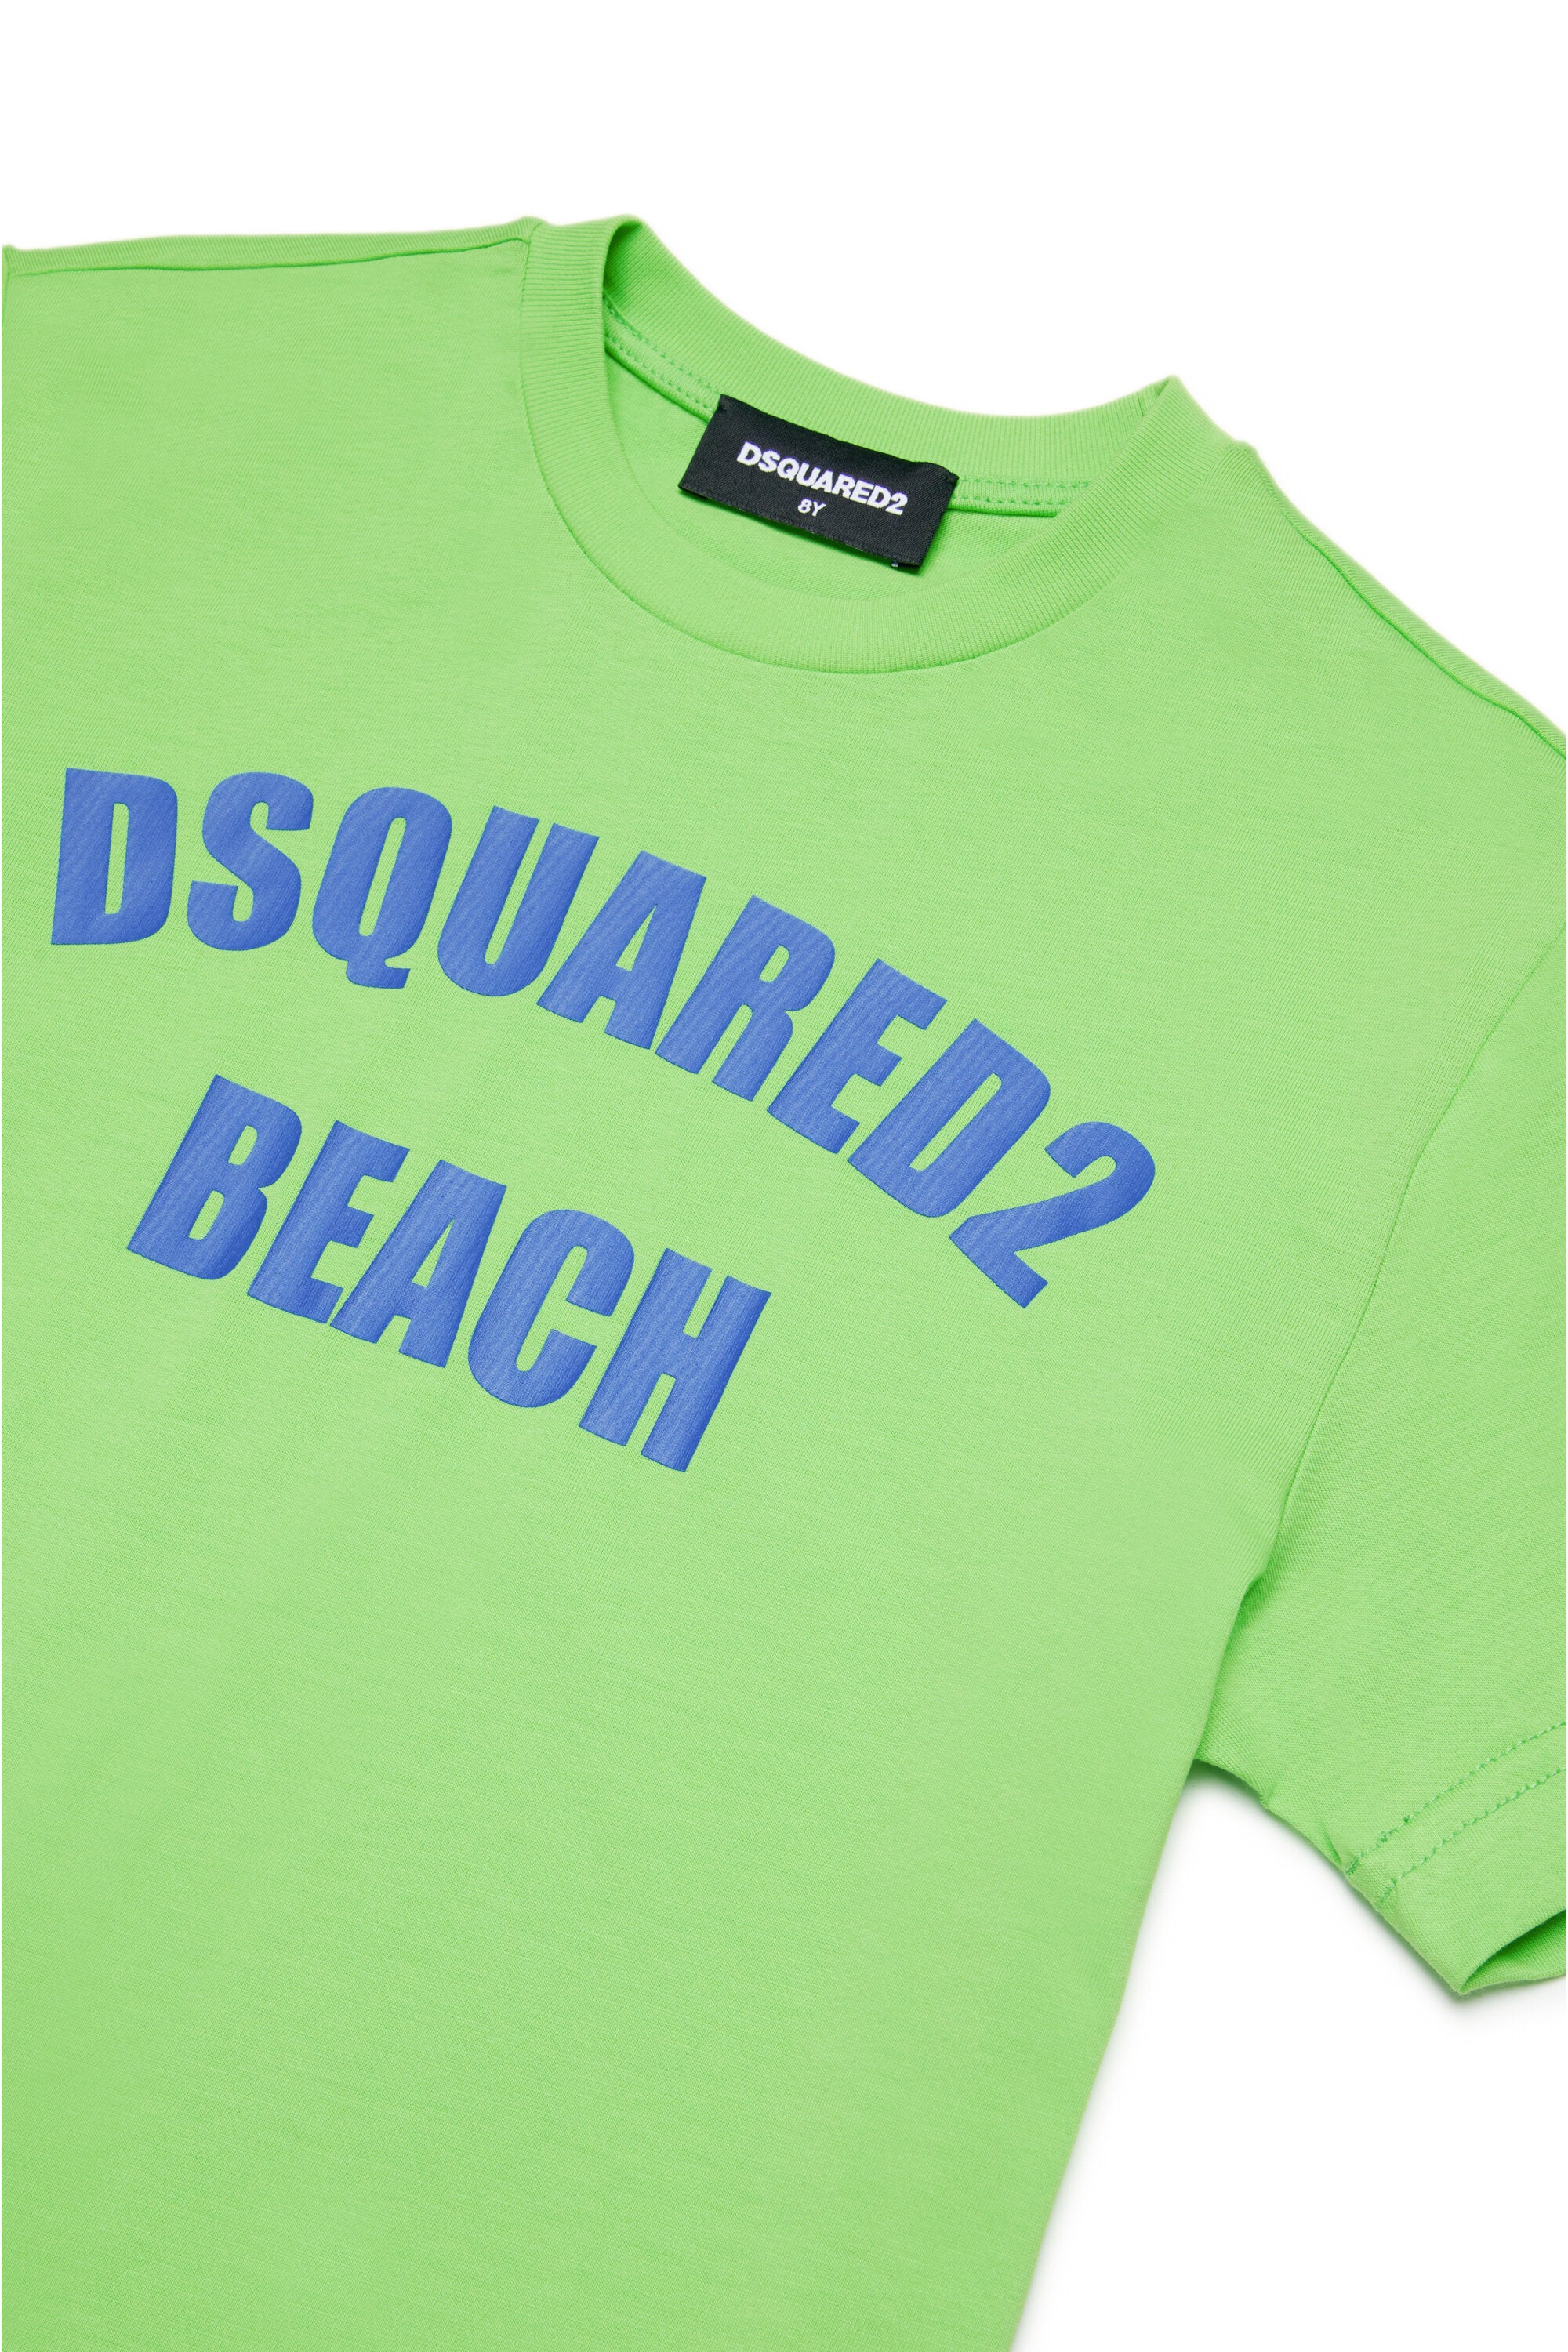 T-shirt with Beach graphics